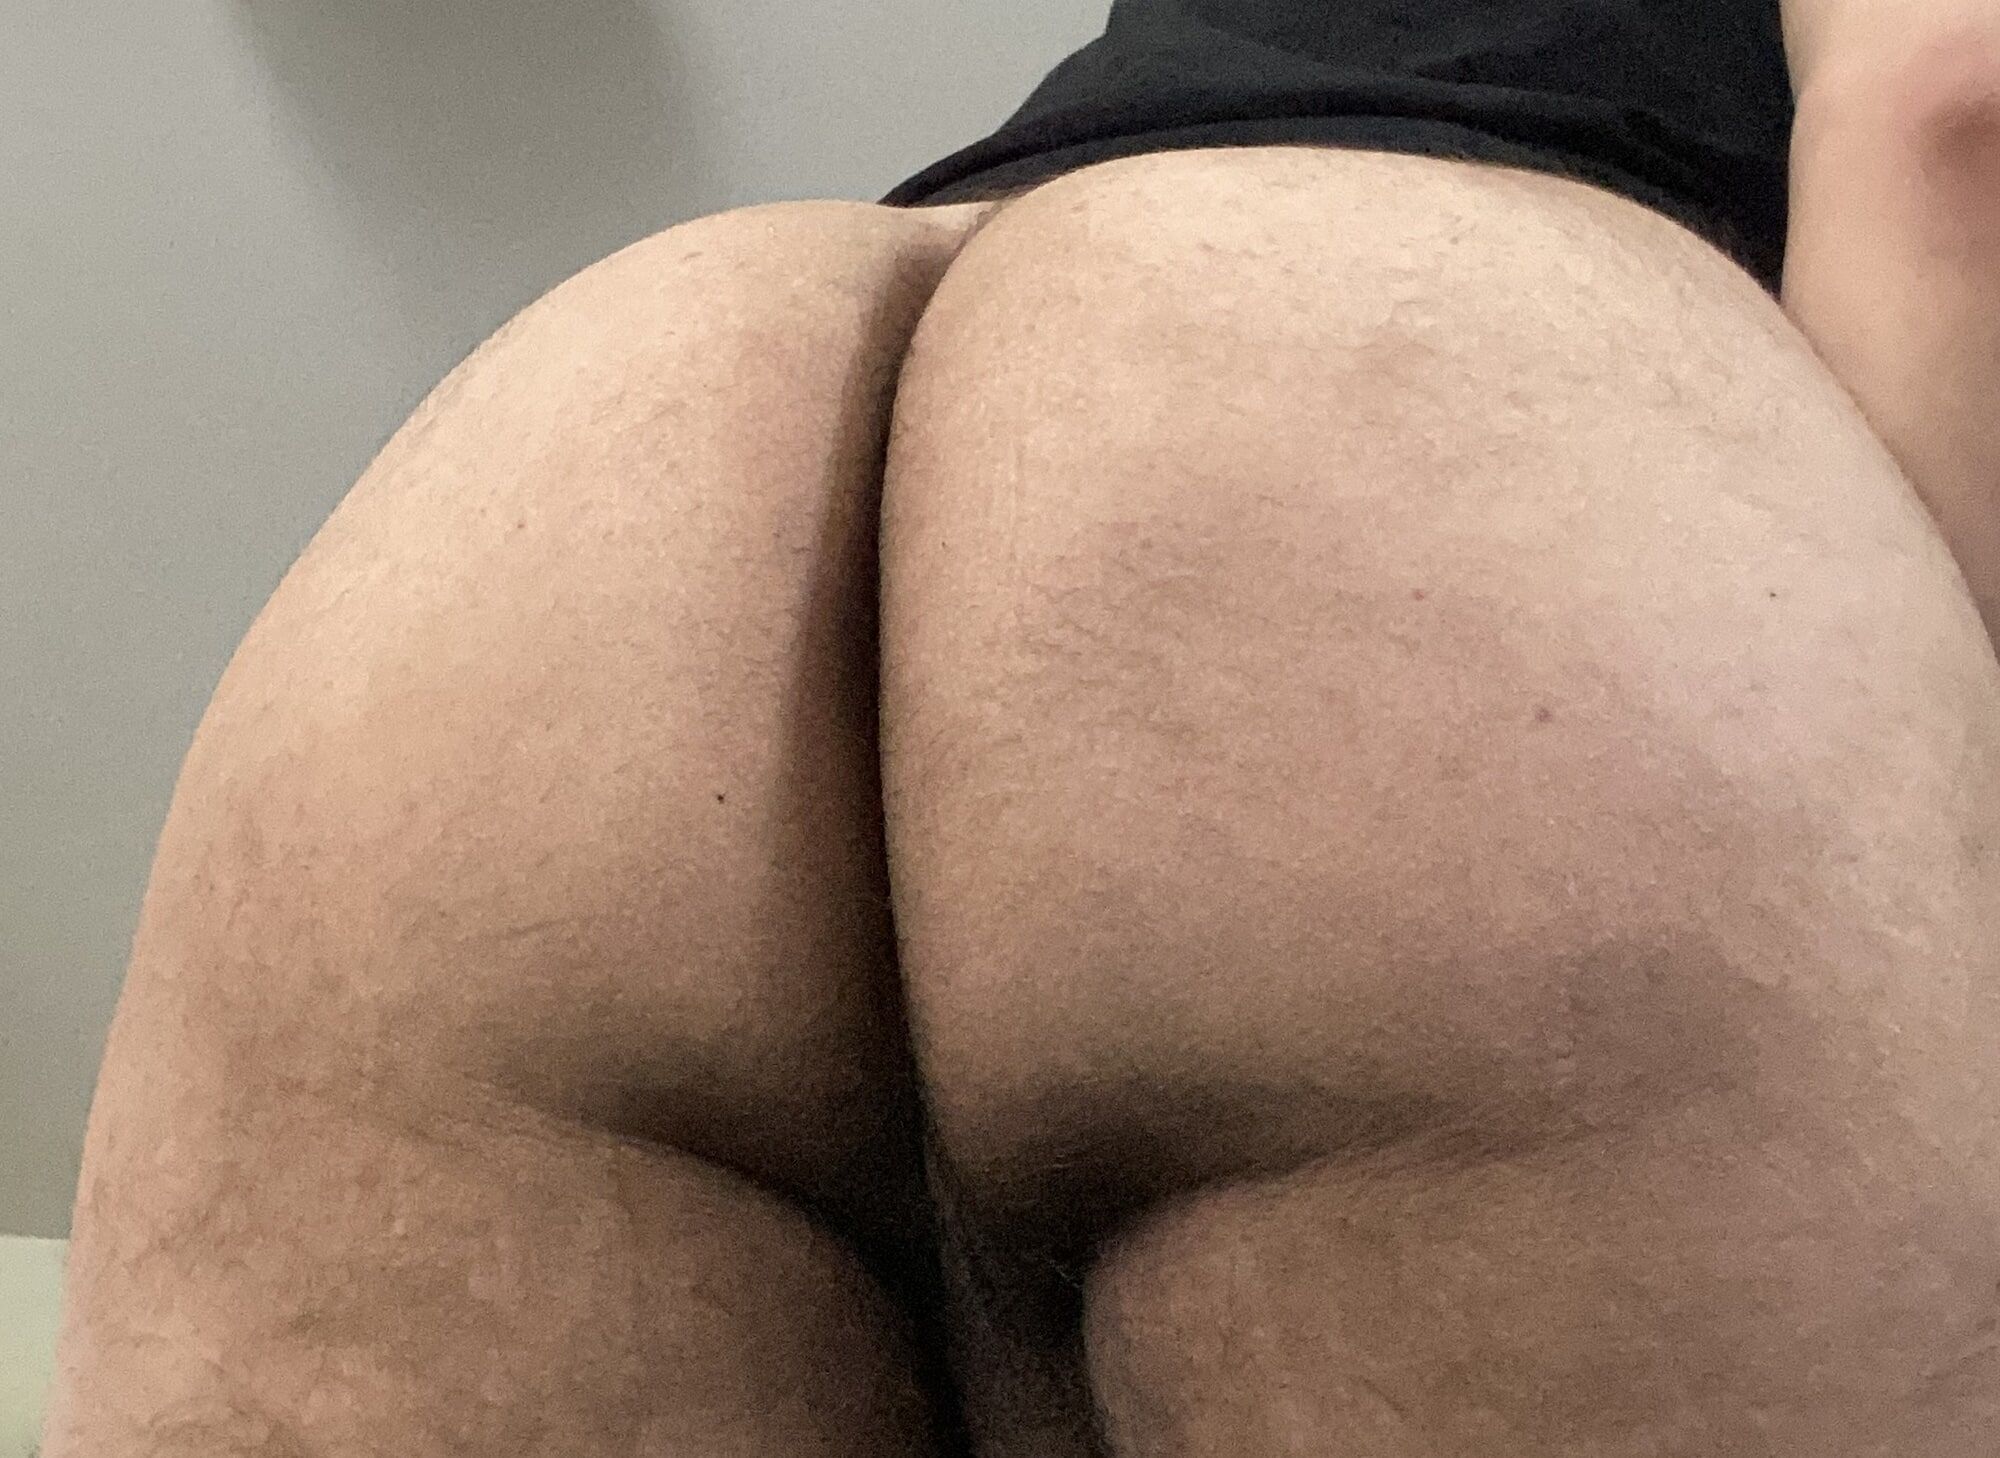 My fat ass with my hole